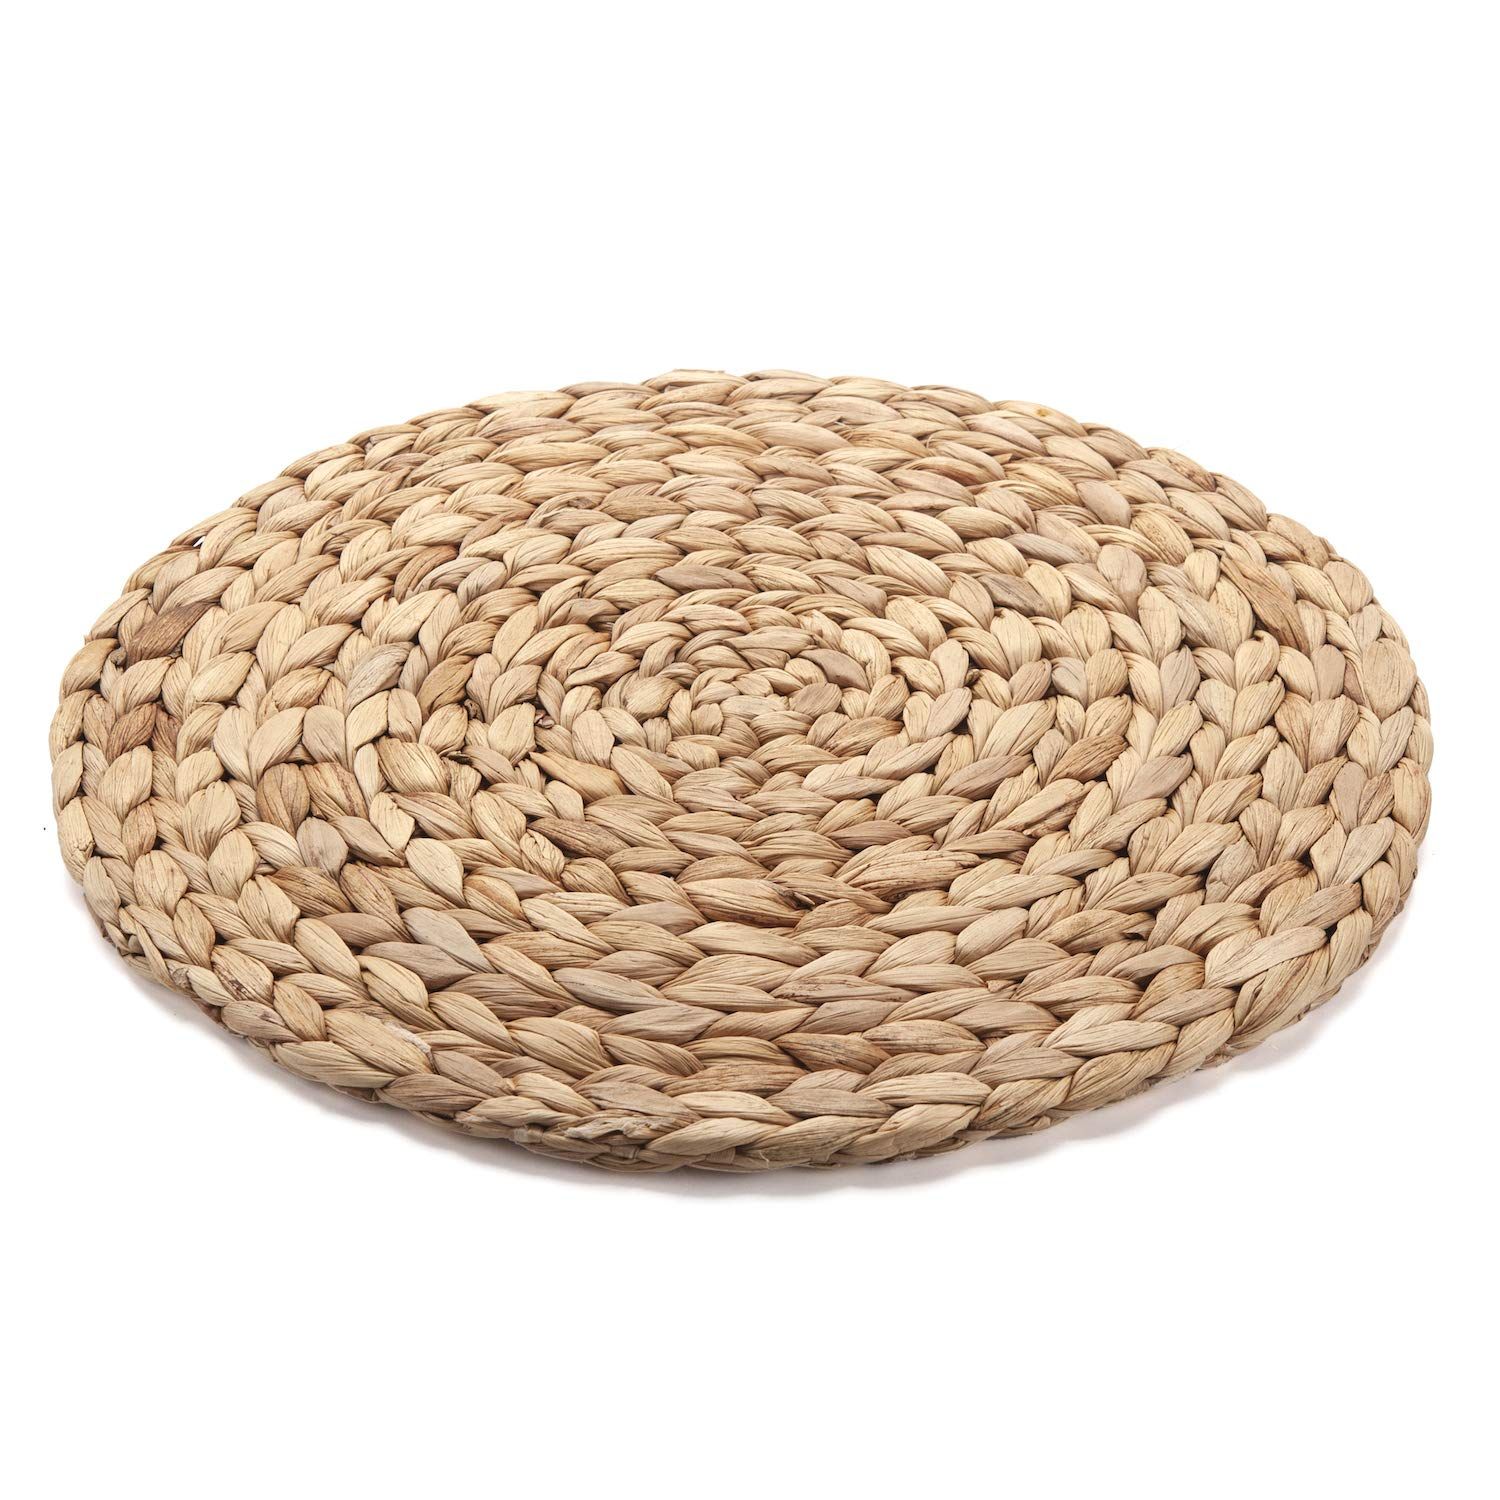 6 Pack, Natural Hand-Woven Water Hyacinth Placemats, Weave Round Place mats, Braided Straw Table Mat | Amazon (US)